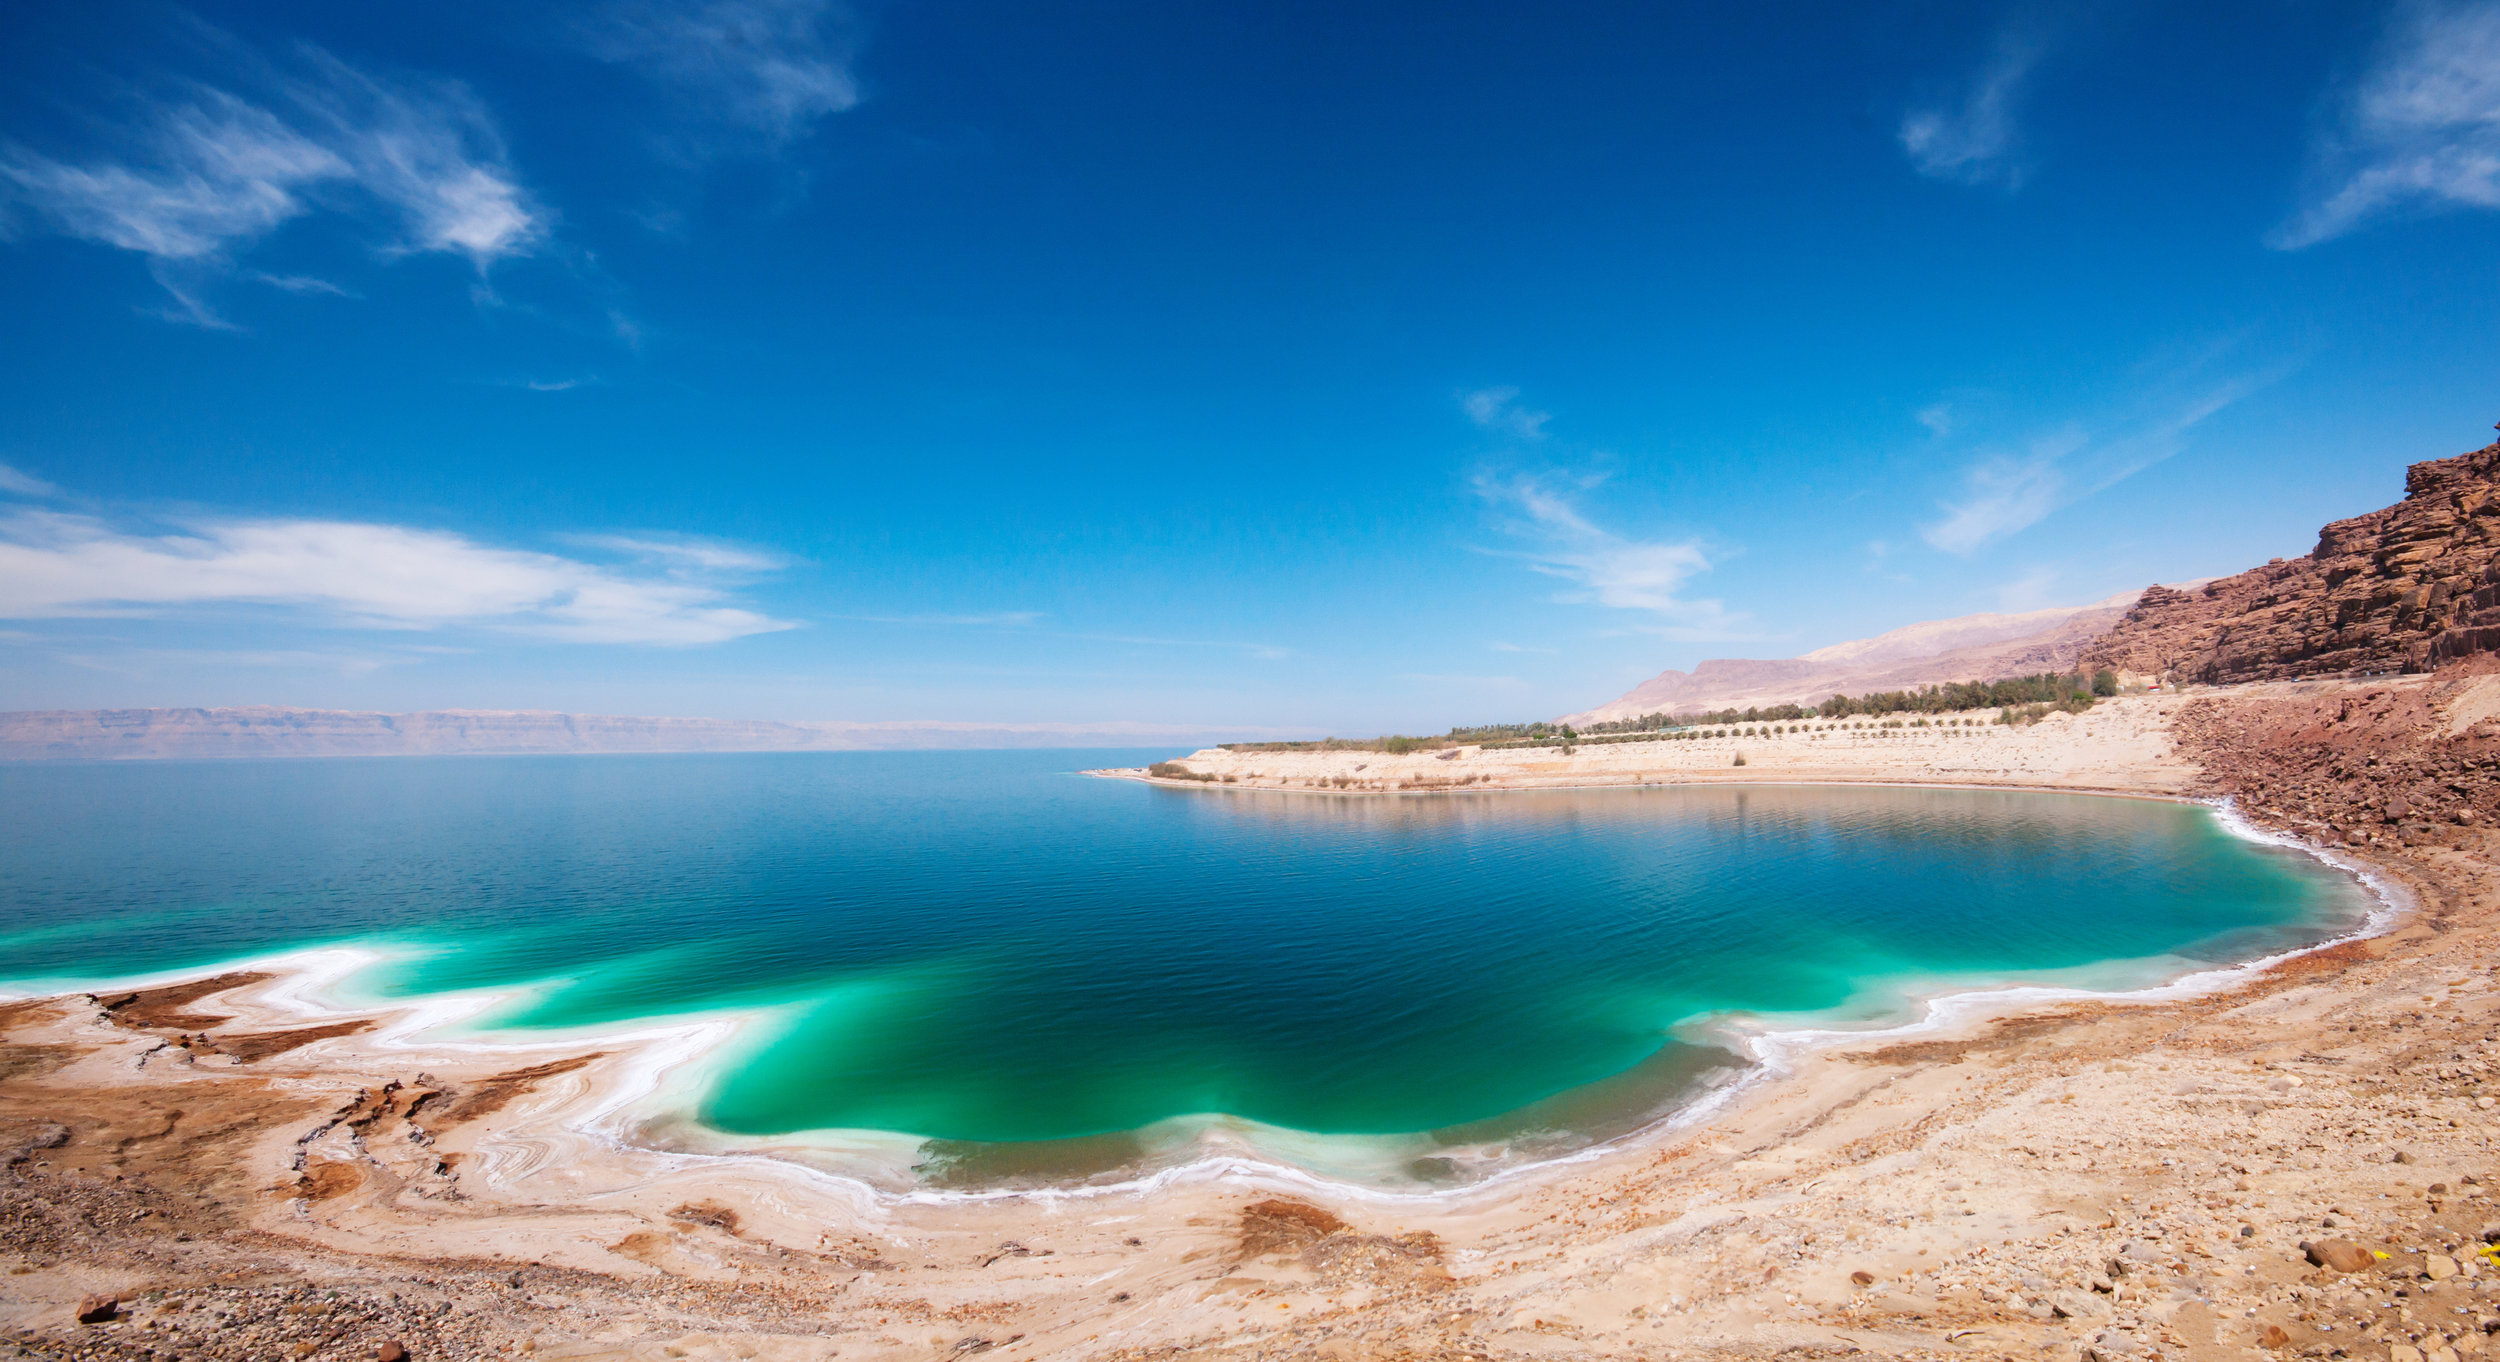 A-beach-by-the-Dead-Sea-with-blue-skies-and-turquoise-water-172401875_4277x2330.jpeg